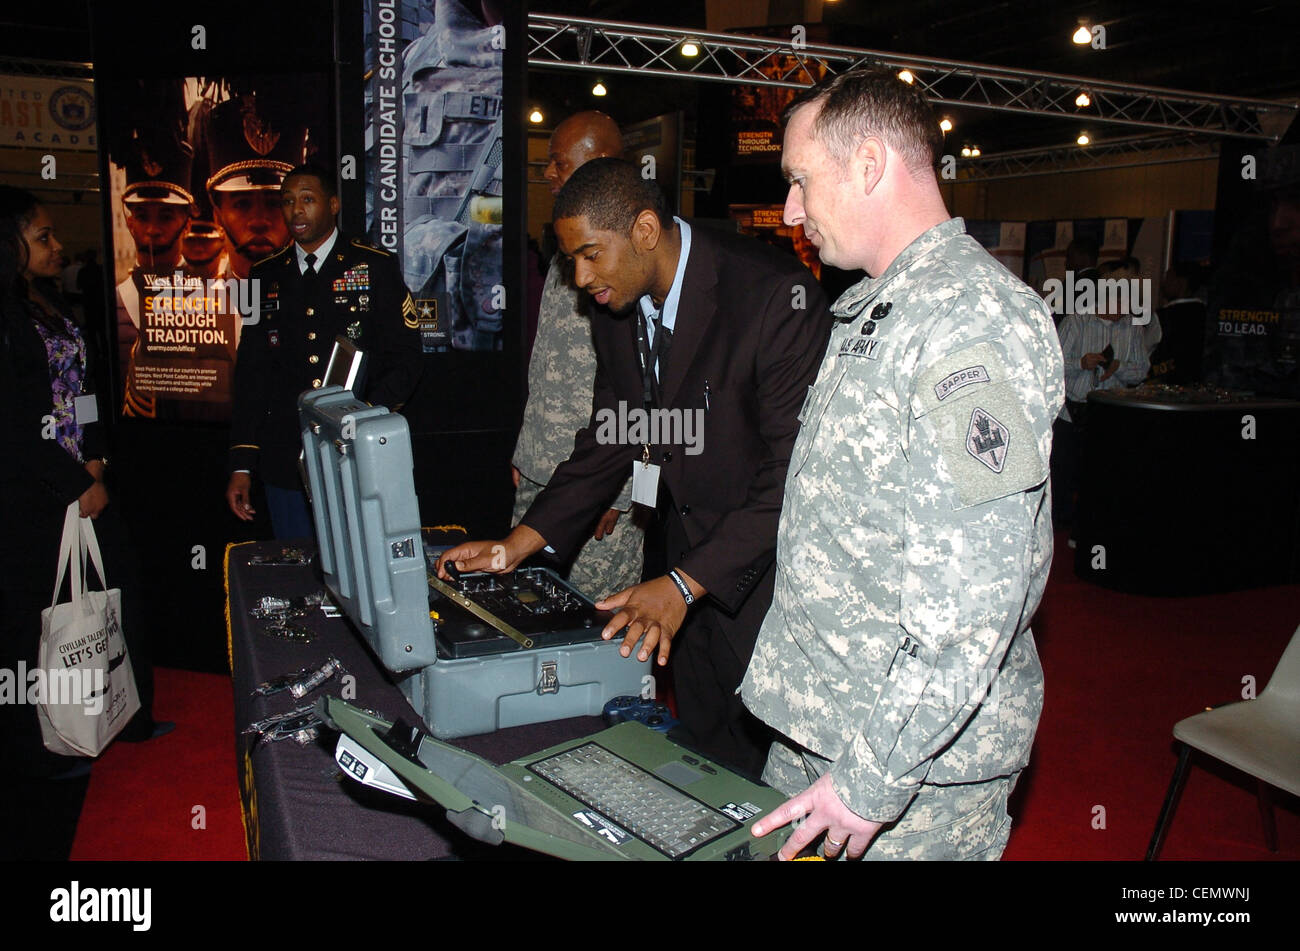 Sgt. 1st Class Todd Moyer, U.S. Army Engineer, Fort Leonard Wood, Mo., works with a student at the US Army robotic display during the BEYA high tech Expo in Philadelphia, Feb. 18, 2012. Stock Photo